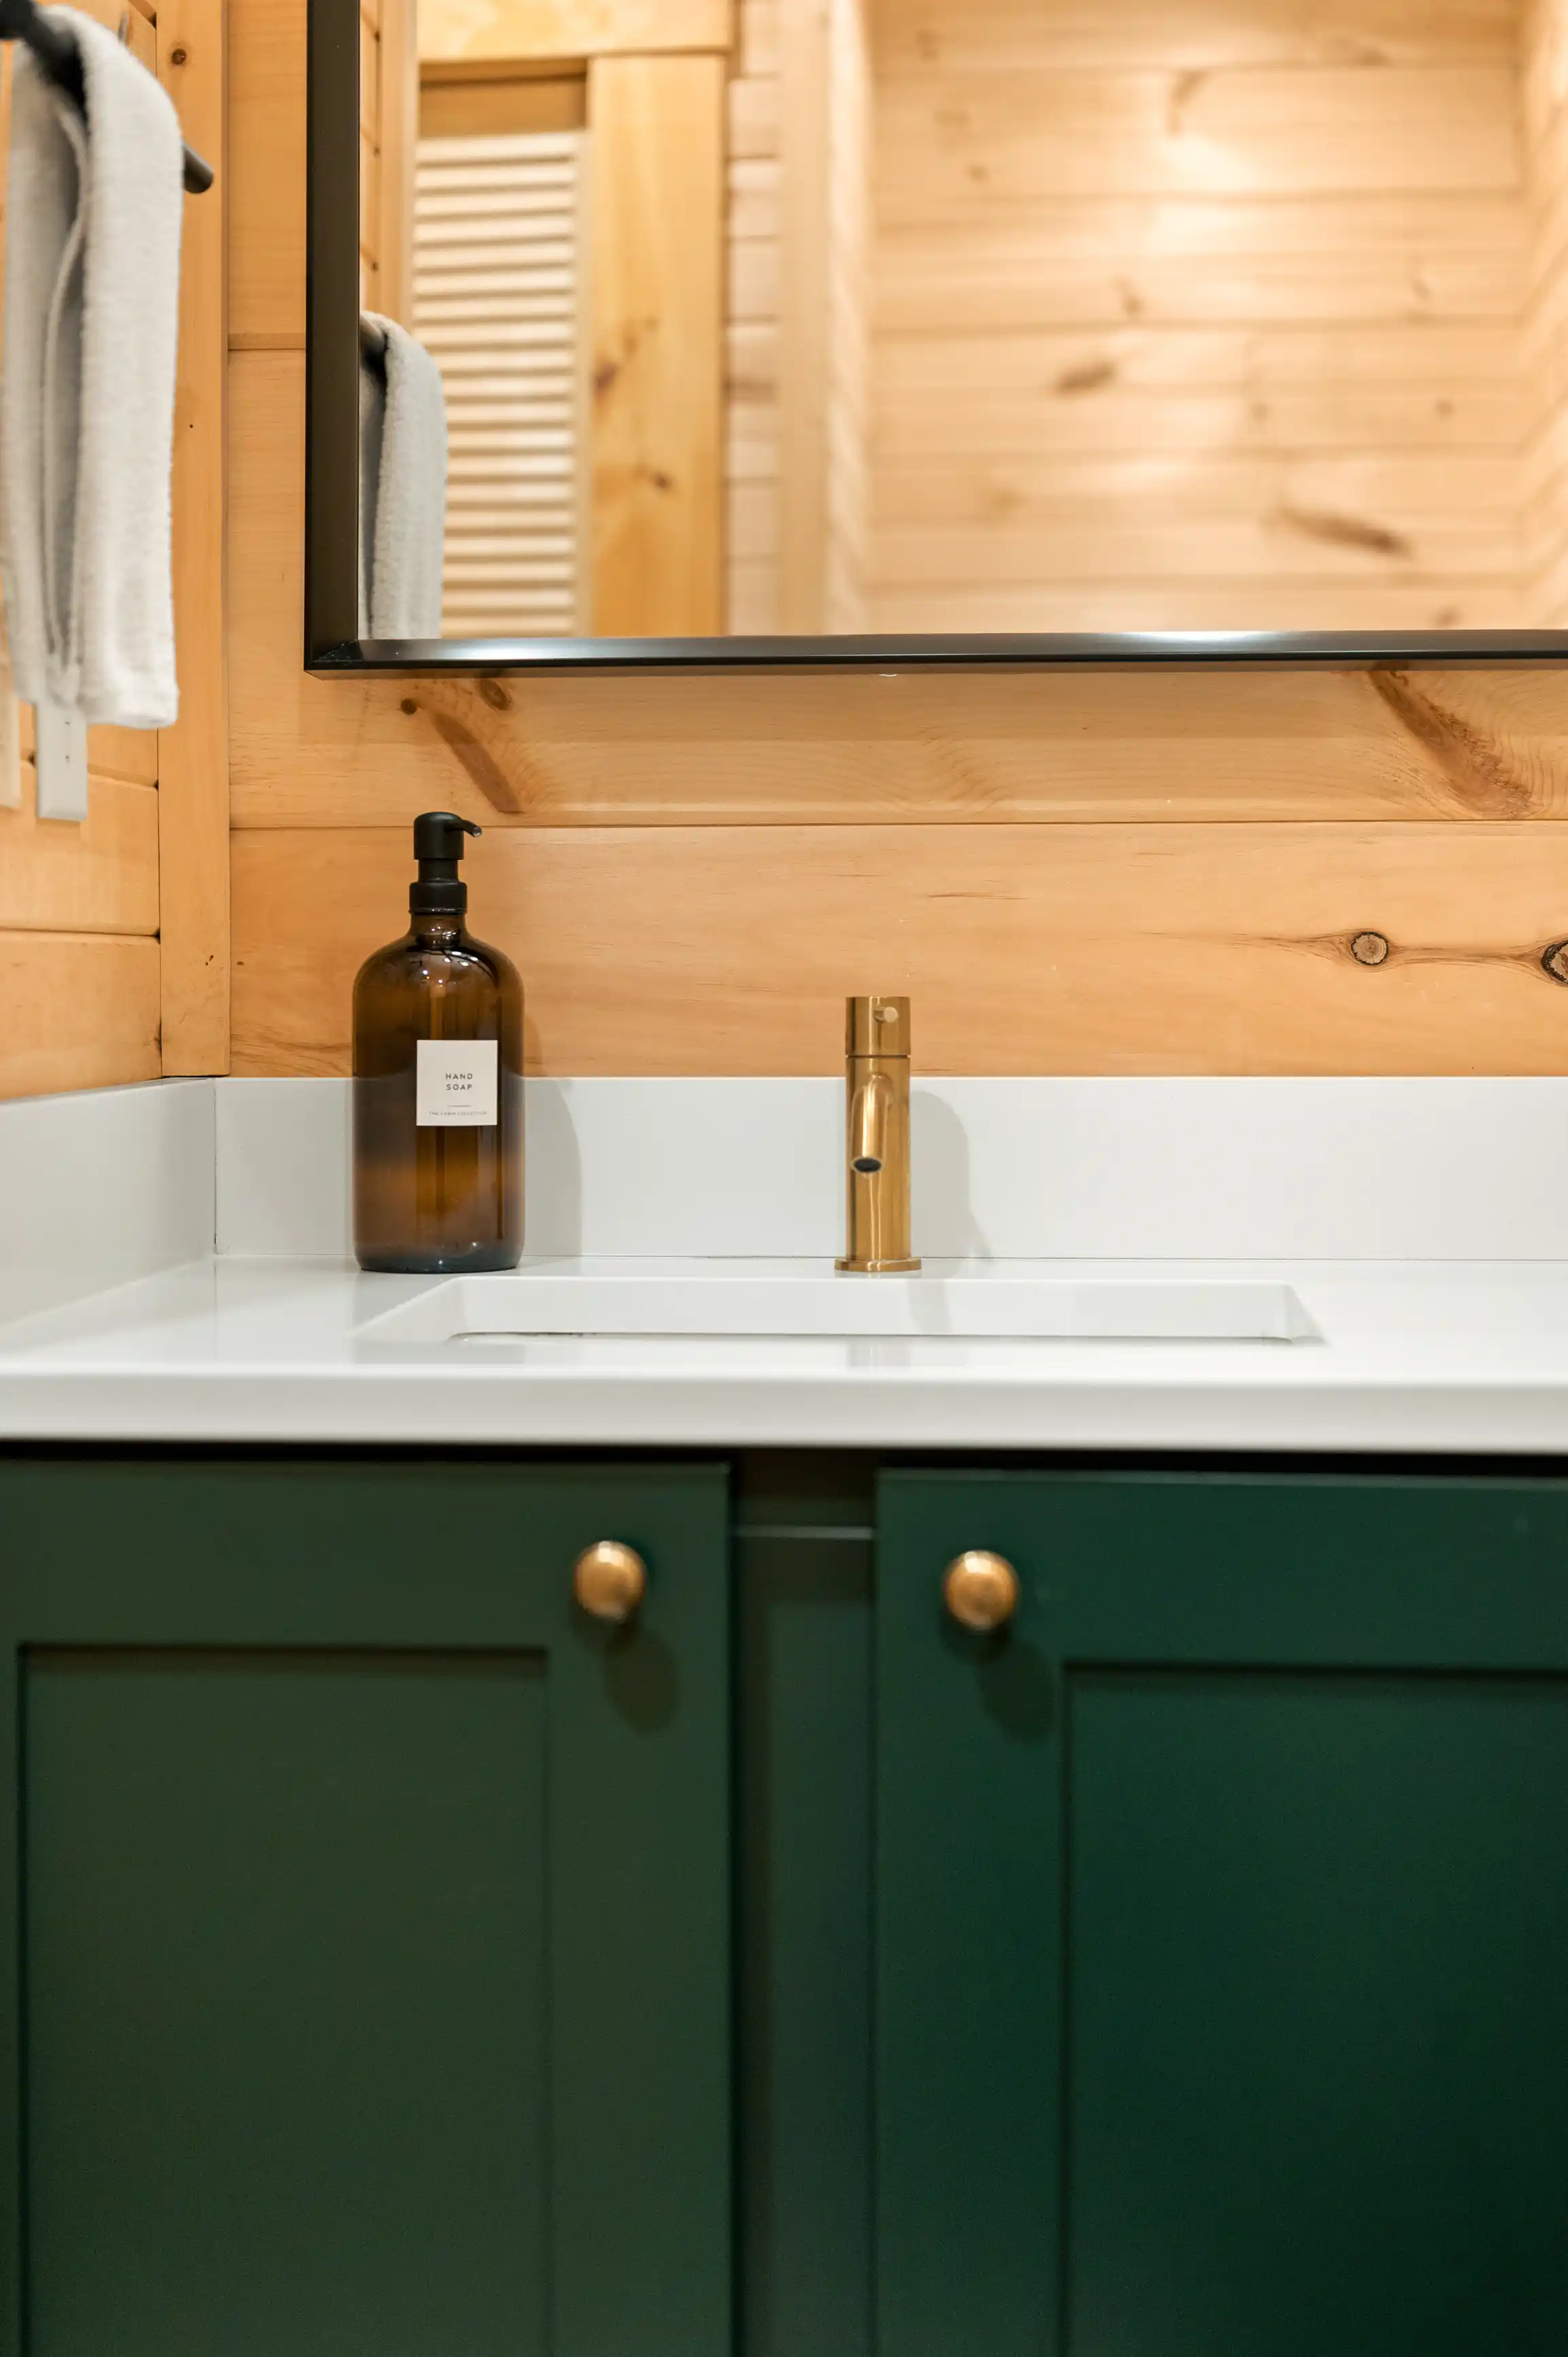 Modern bathroom sink with a white countertop, green cabinets, gold hardware, and a brown glass bottle labeled "HAND SOAP"; reflection of wooden interior visible in the mirror above.